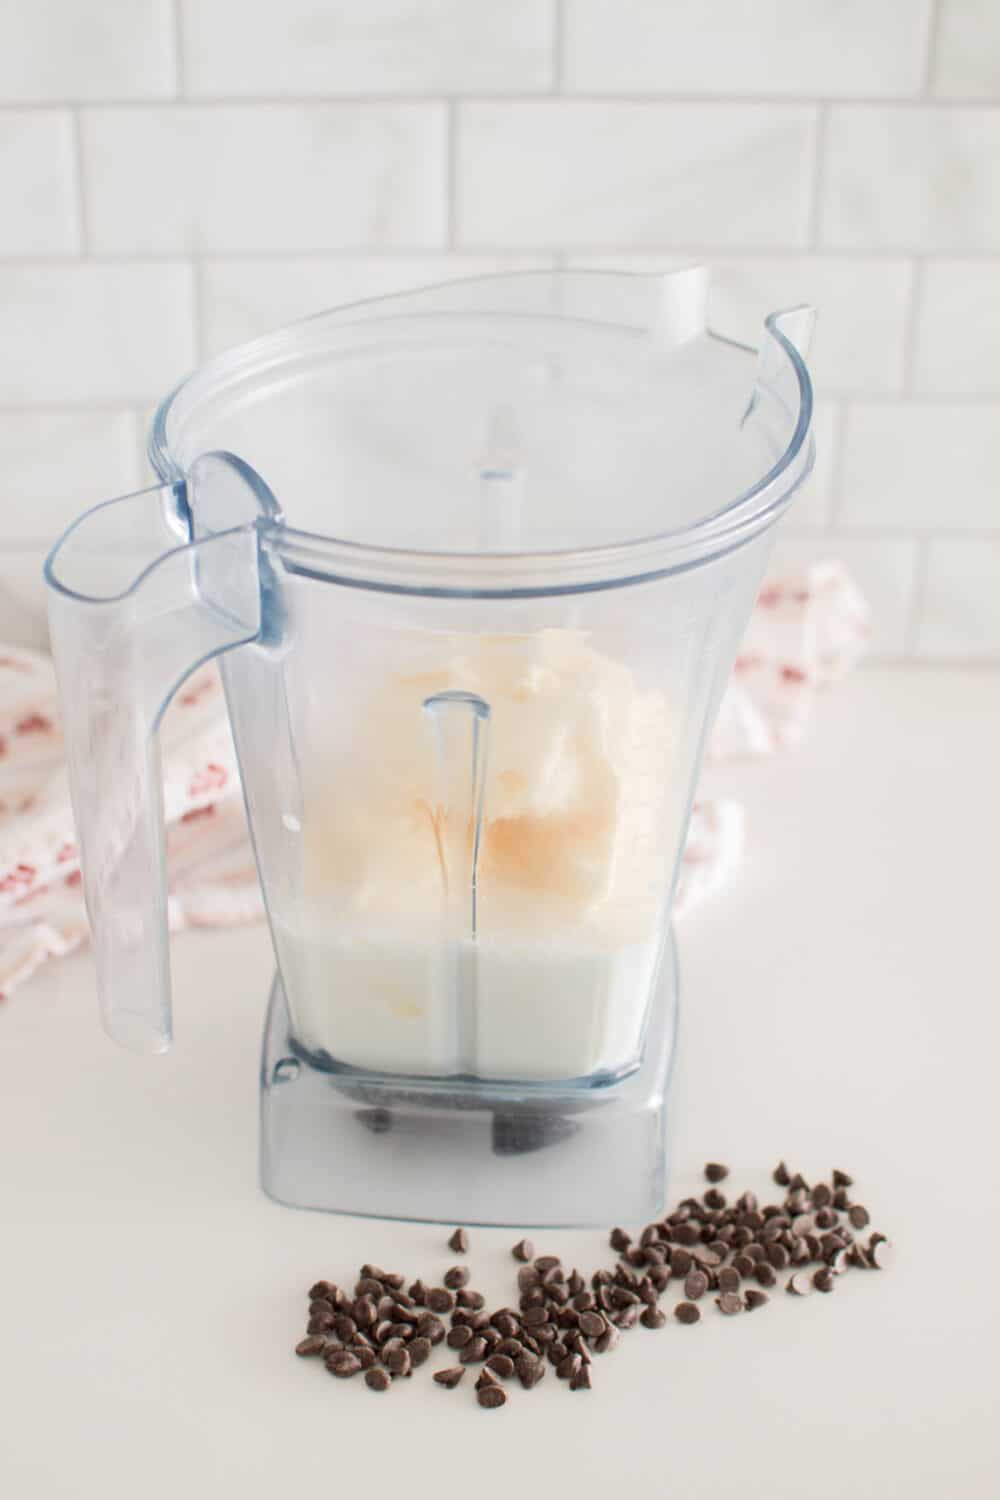 Mixing together milk and vanilla ice cream to a blender